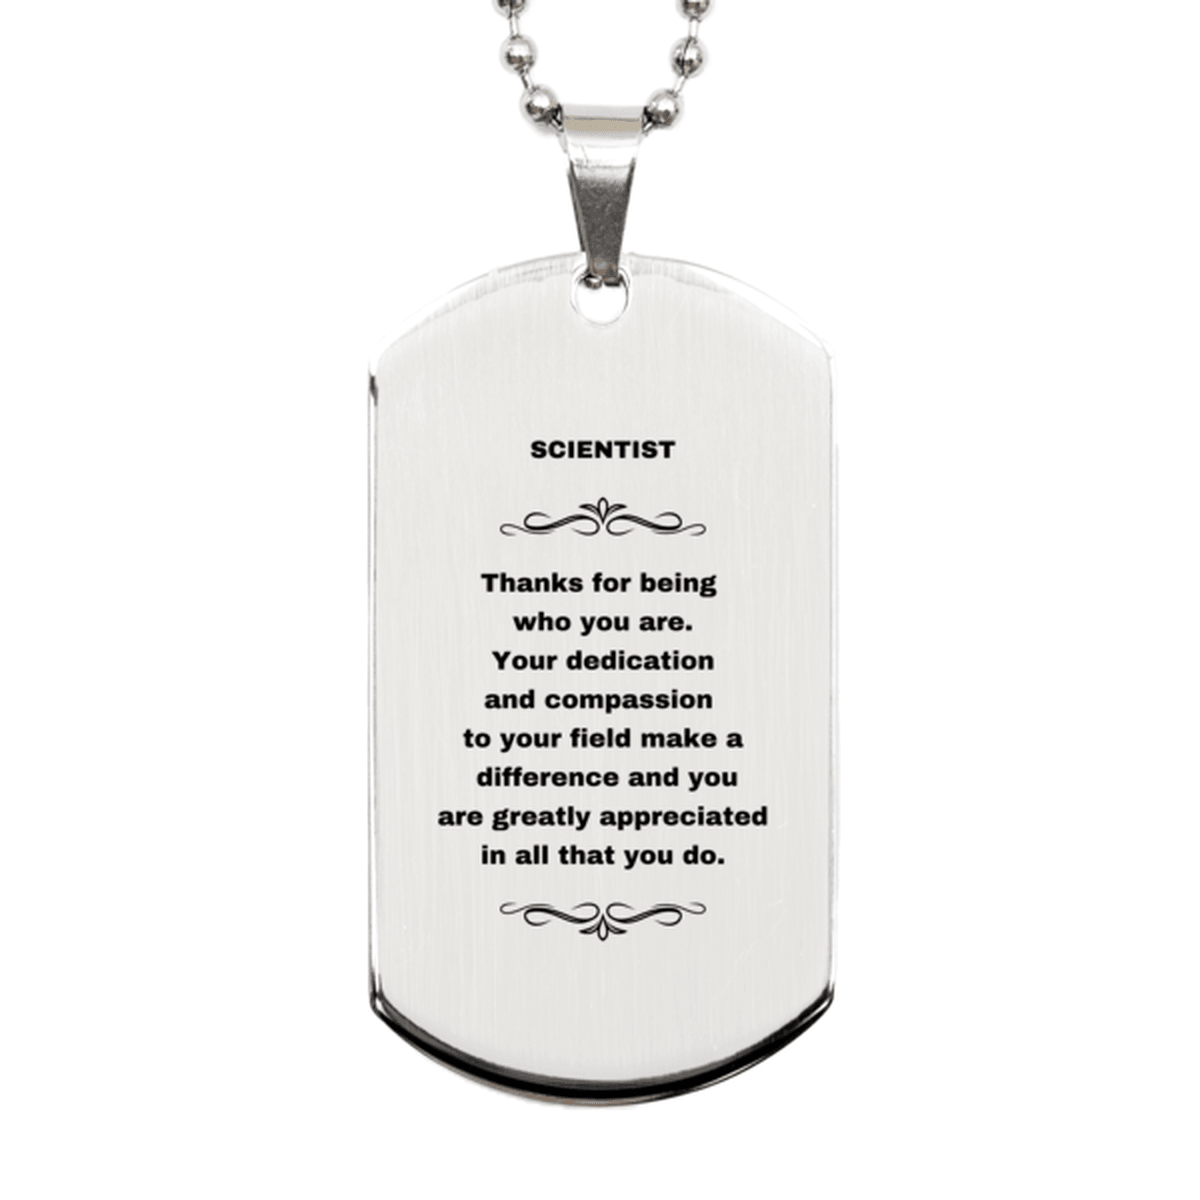 Scientist Silver Engraved Dog Tag Necklace - Thanks for being who you are - Birthday Christmas Jewelry Gifts Coworkers Colleague Boss - Mallard Moon Gift Shop